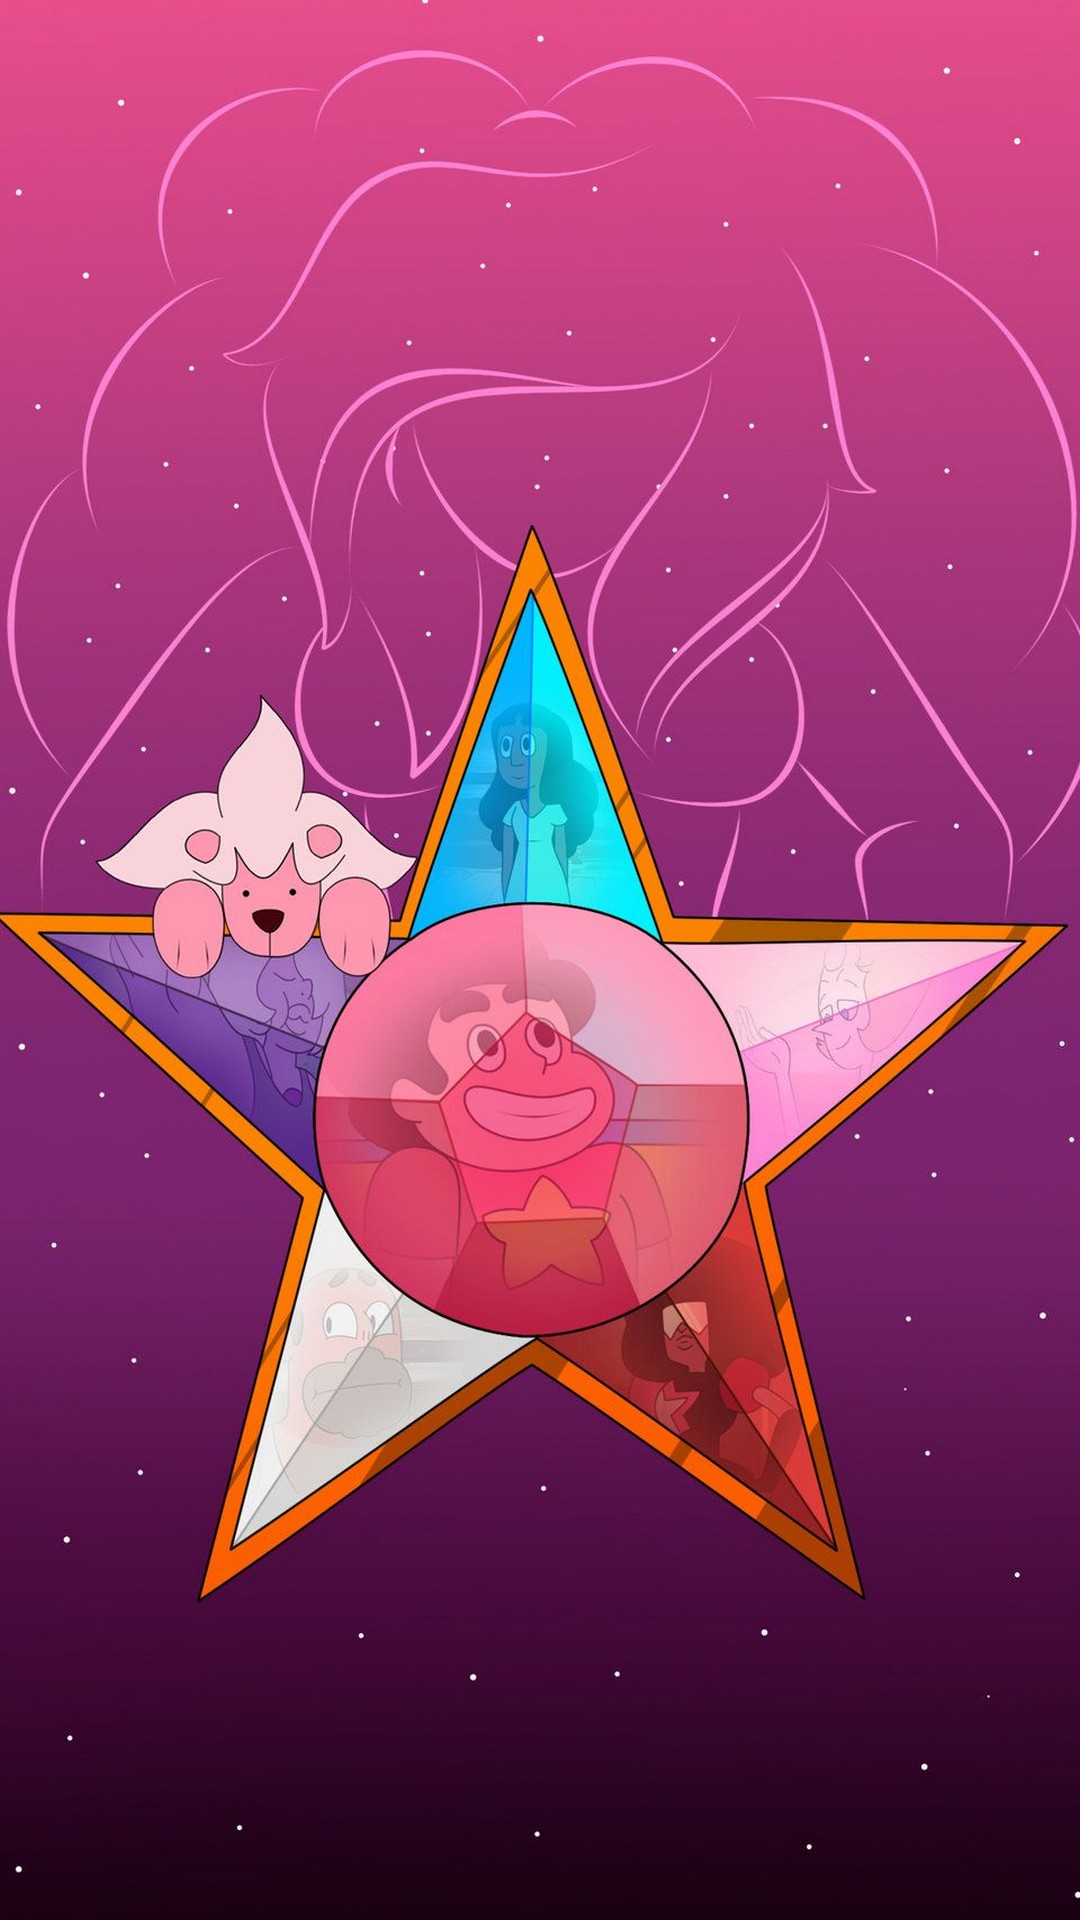 Android Wallpaper Steven Universe With high-resolution 1080X1920 pixel. You can use this wallpaper for your Android backgrounds, Tablet, Samsung Screensavers, Mobile Phone Lock Screen and another Smartphones device